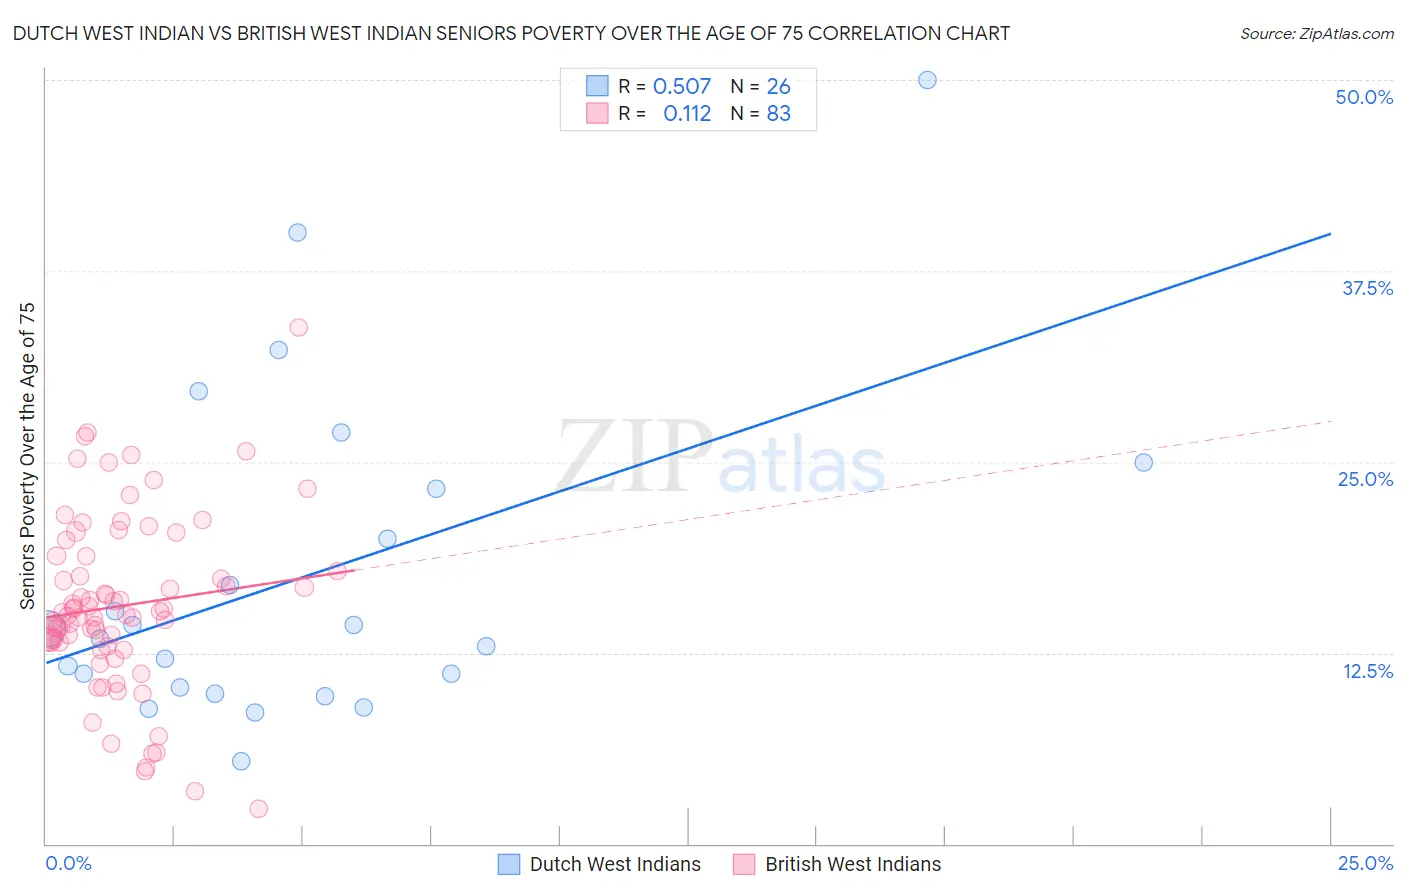 Dutch West Indian vs British West Indian Seniors Poverty Over the Age of 75